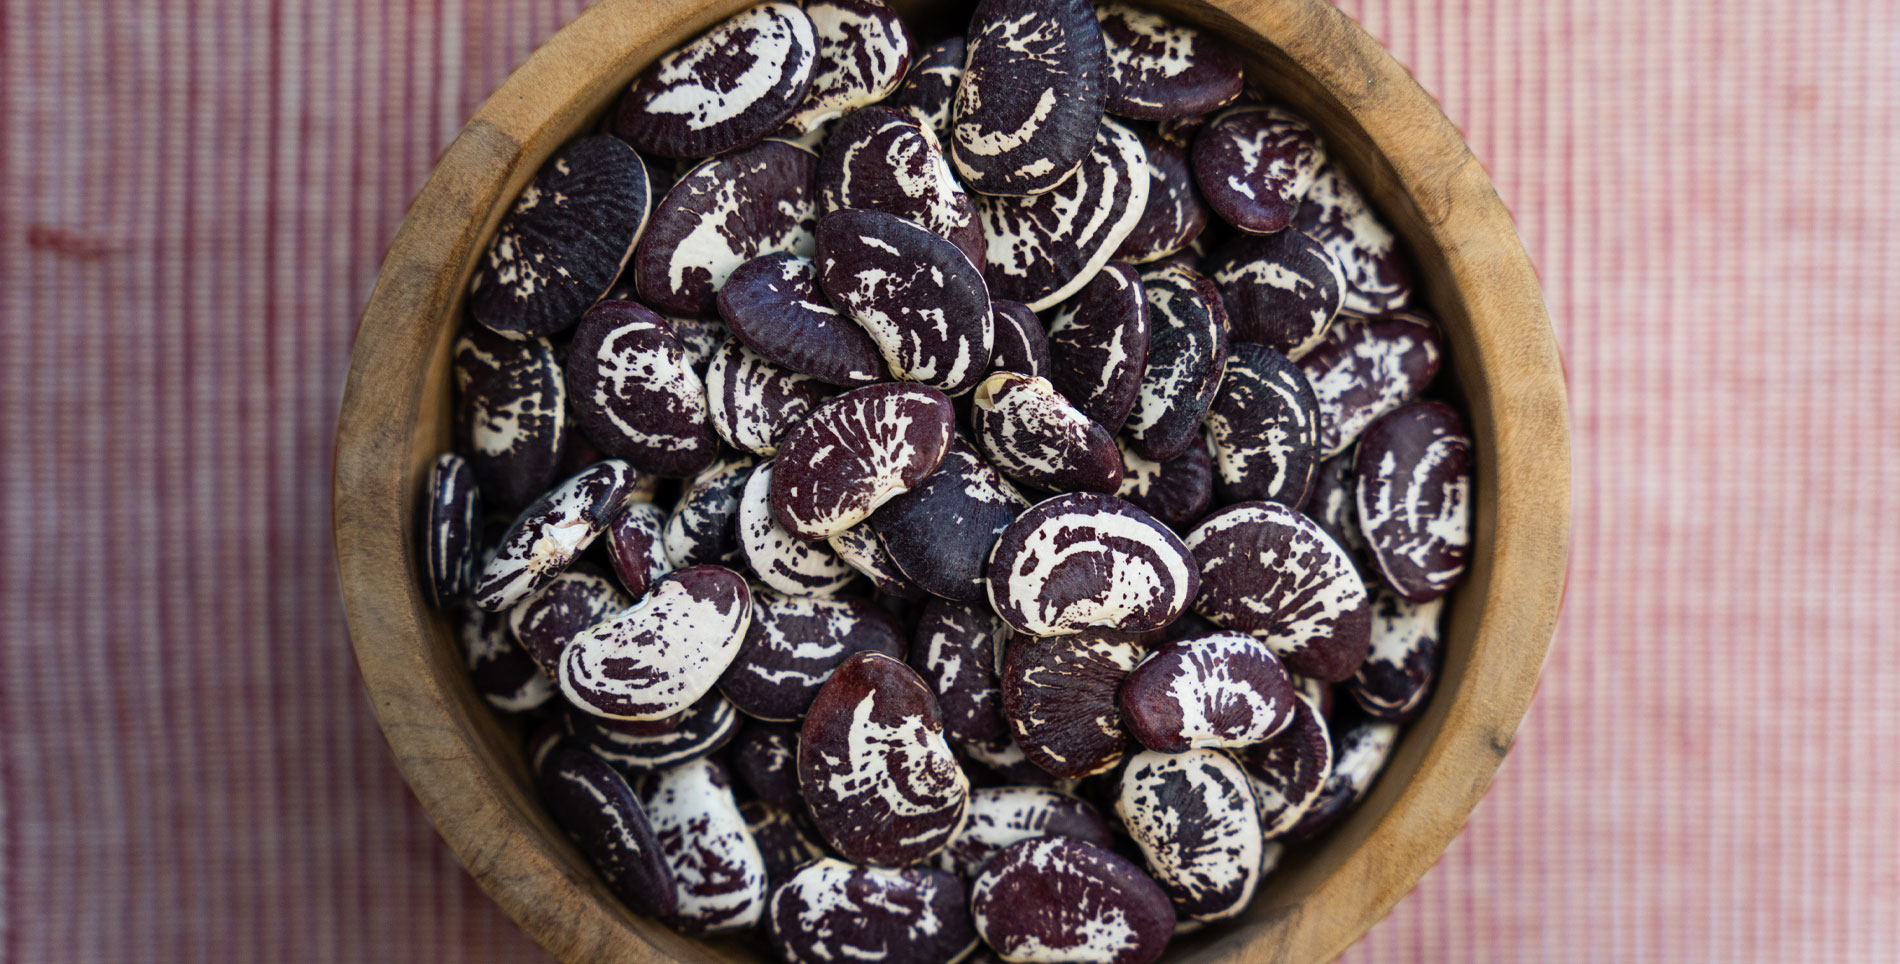 Heirloom Beans: From Our Ancestors, For Our Descendants